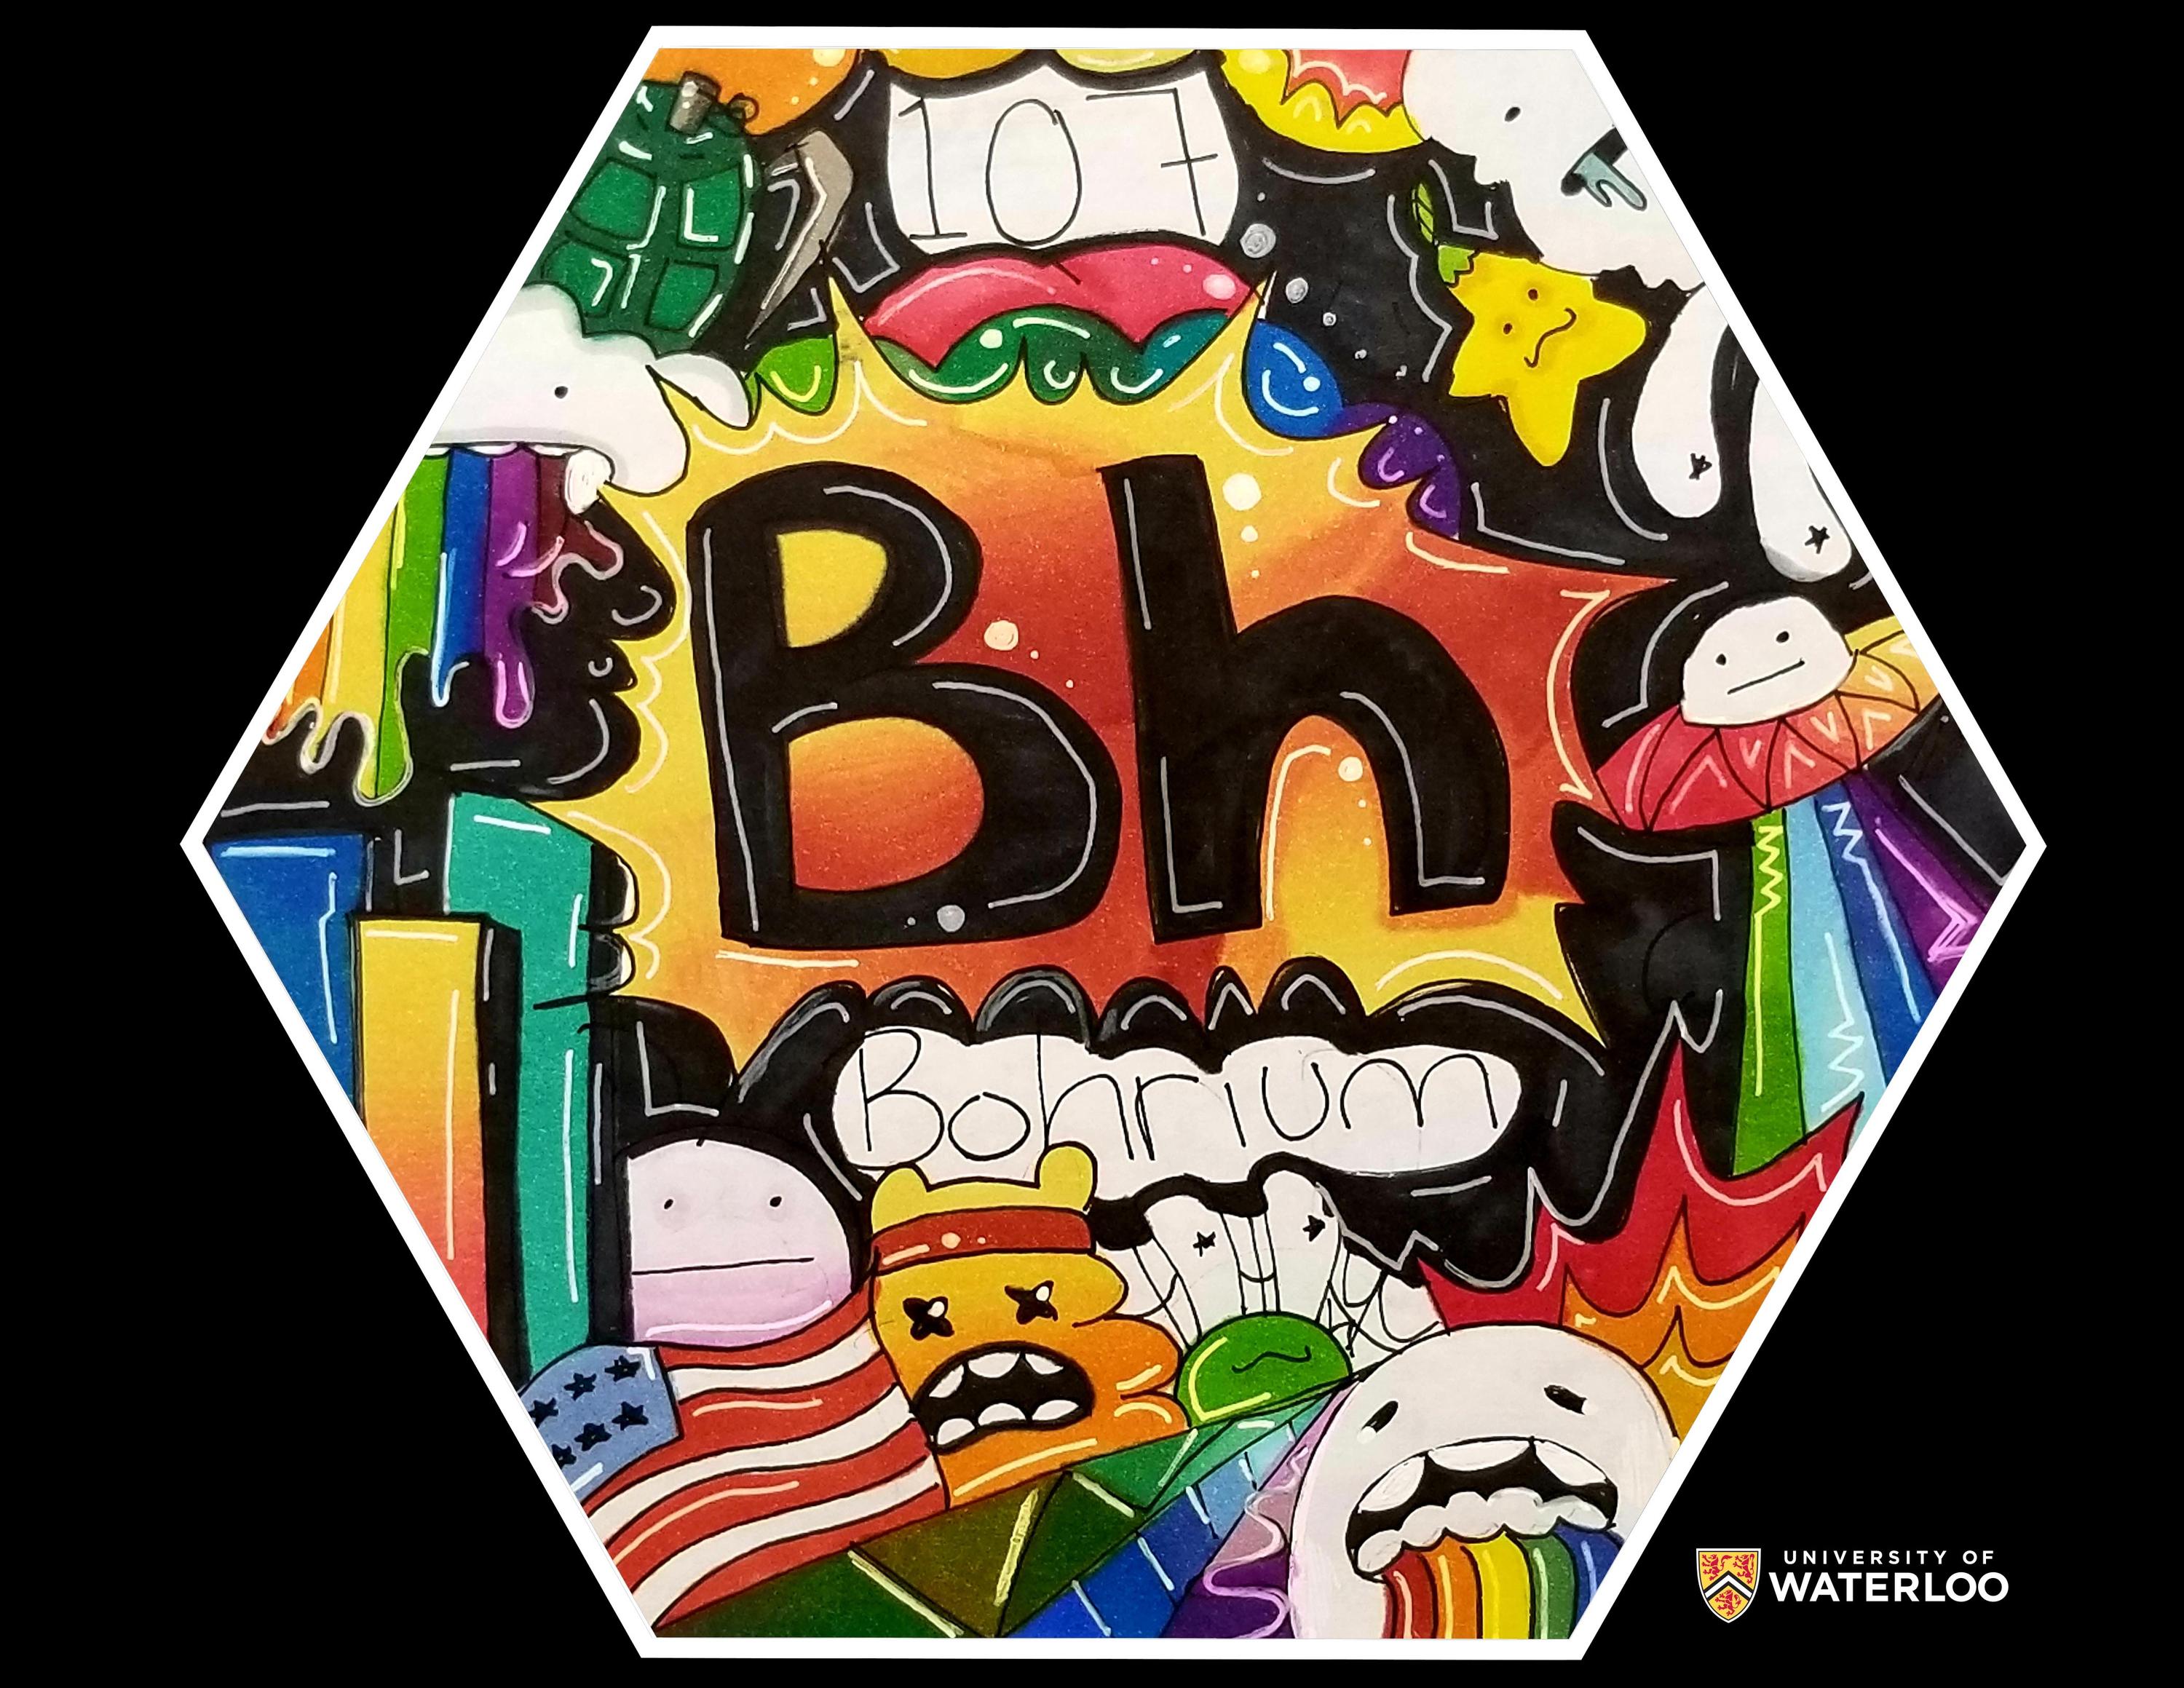 Watercolor and pen on paper. Stylized as urban graffiti with chemical symbol “Bh” centre along with “107” and “Bohrium” in the German flag colors. Surrounding are images of rainbows and video game-like characters producing rainbows all layered on top of one another.